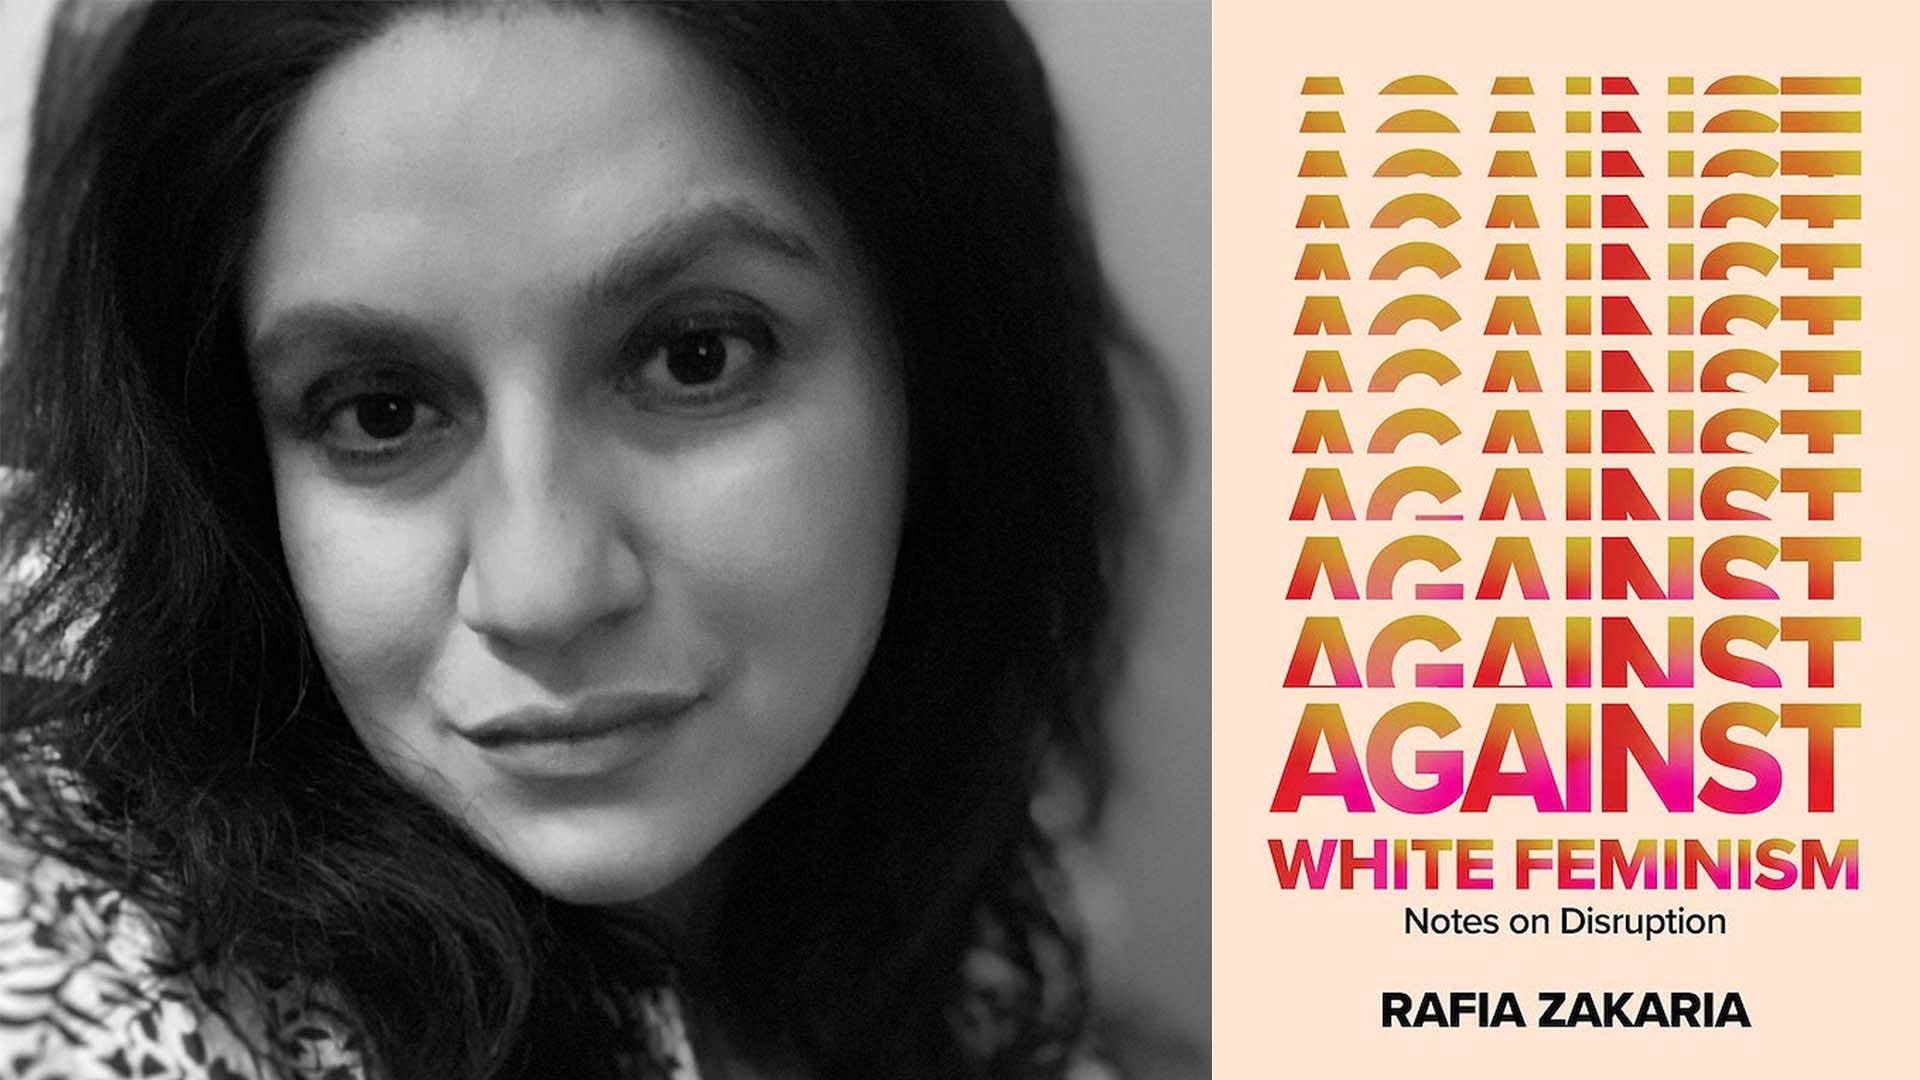 Rafia Zakaria, an activist and author of Against White Feminism, will join the Northwestern Qatar community for a conversation on issues of inclusion in contemporary feminist movements.